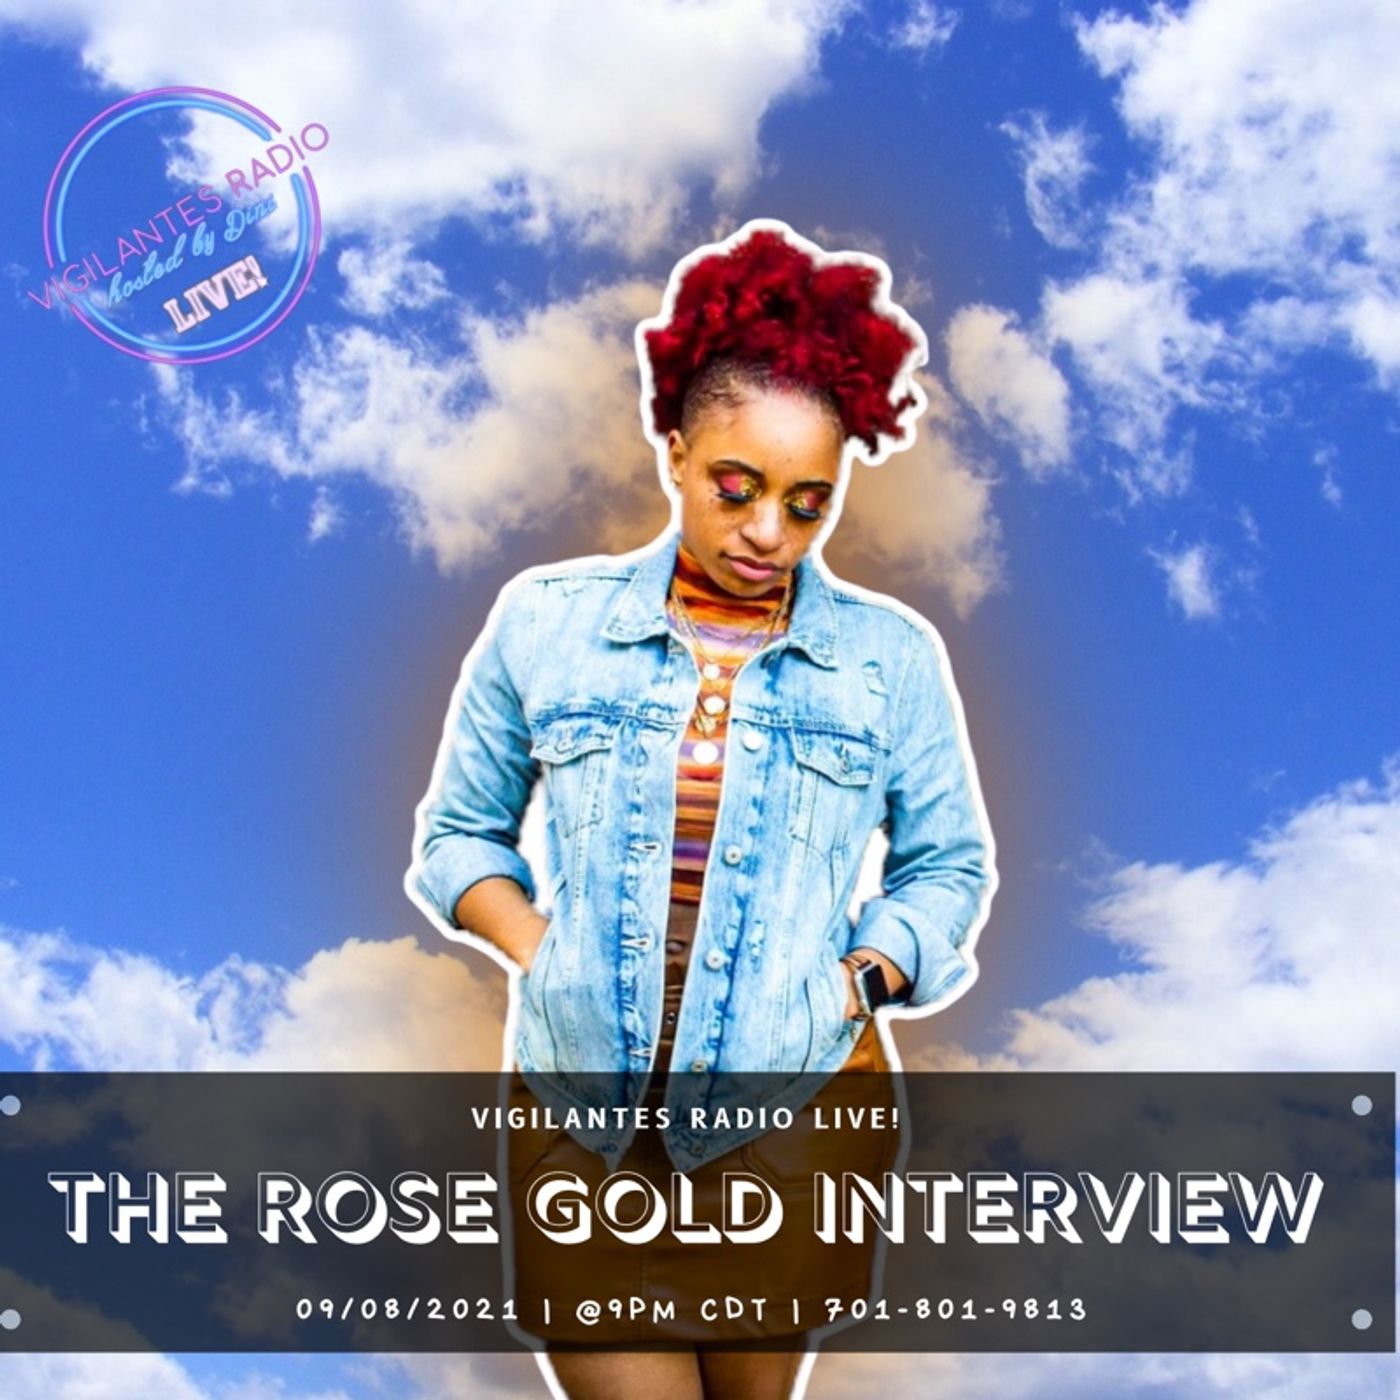 The Gold Rose Interview. Image